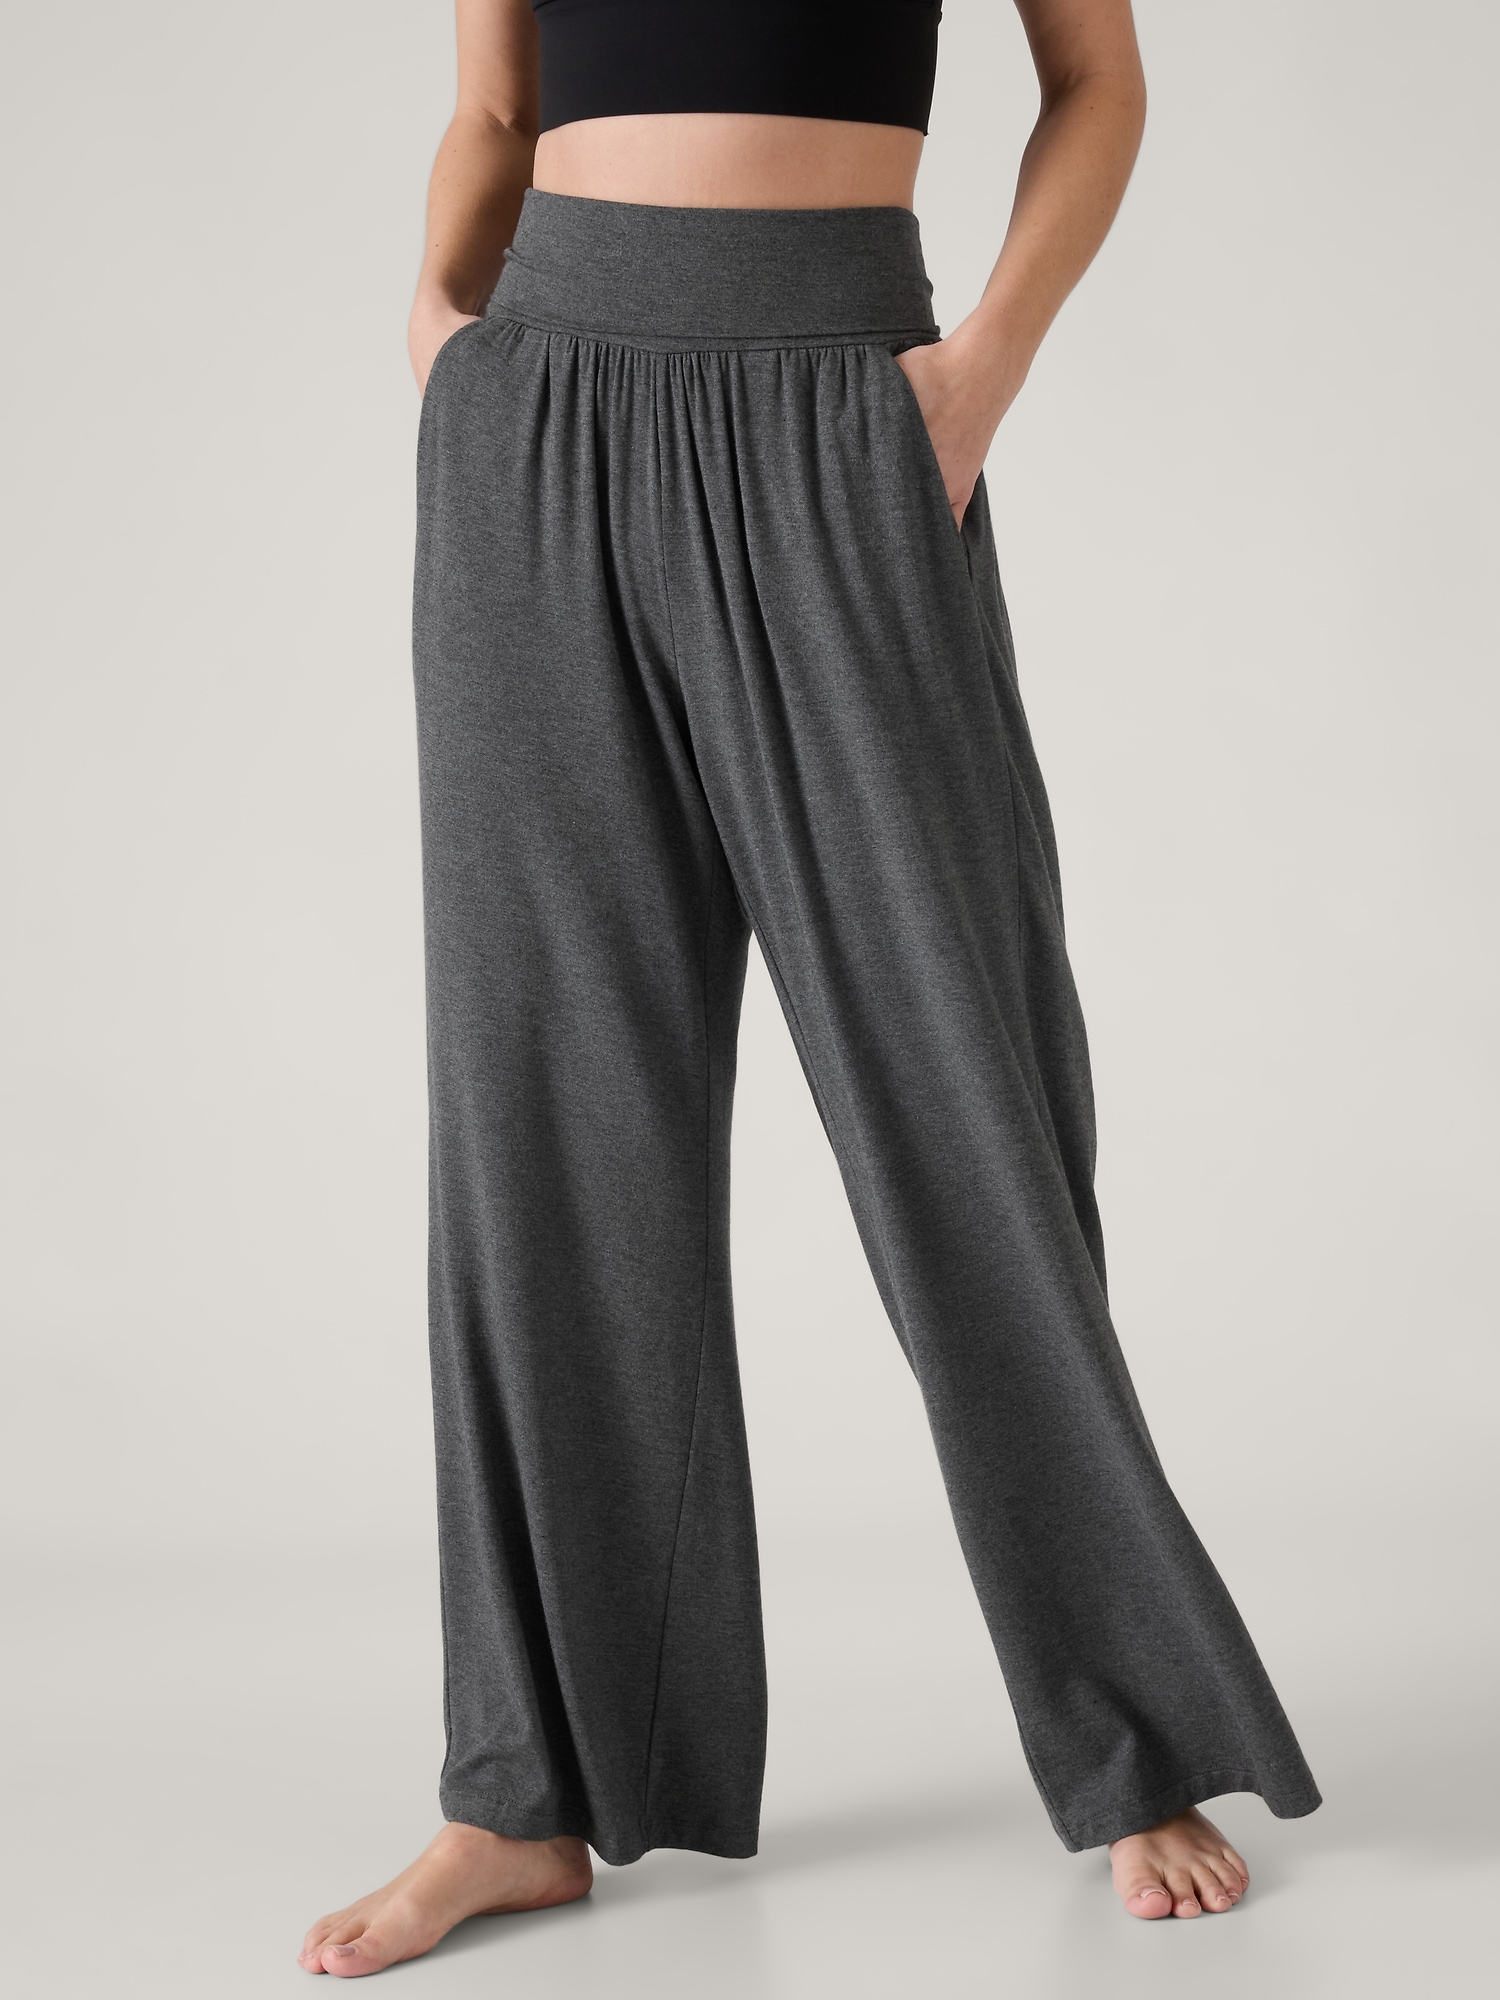 Lole Womens Lounge Pant - 2 Pack - Charcoal (grey) & Black Size